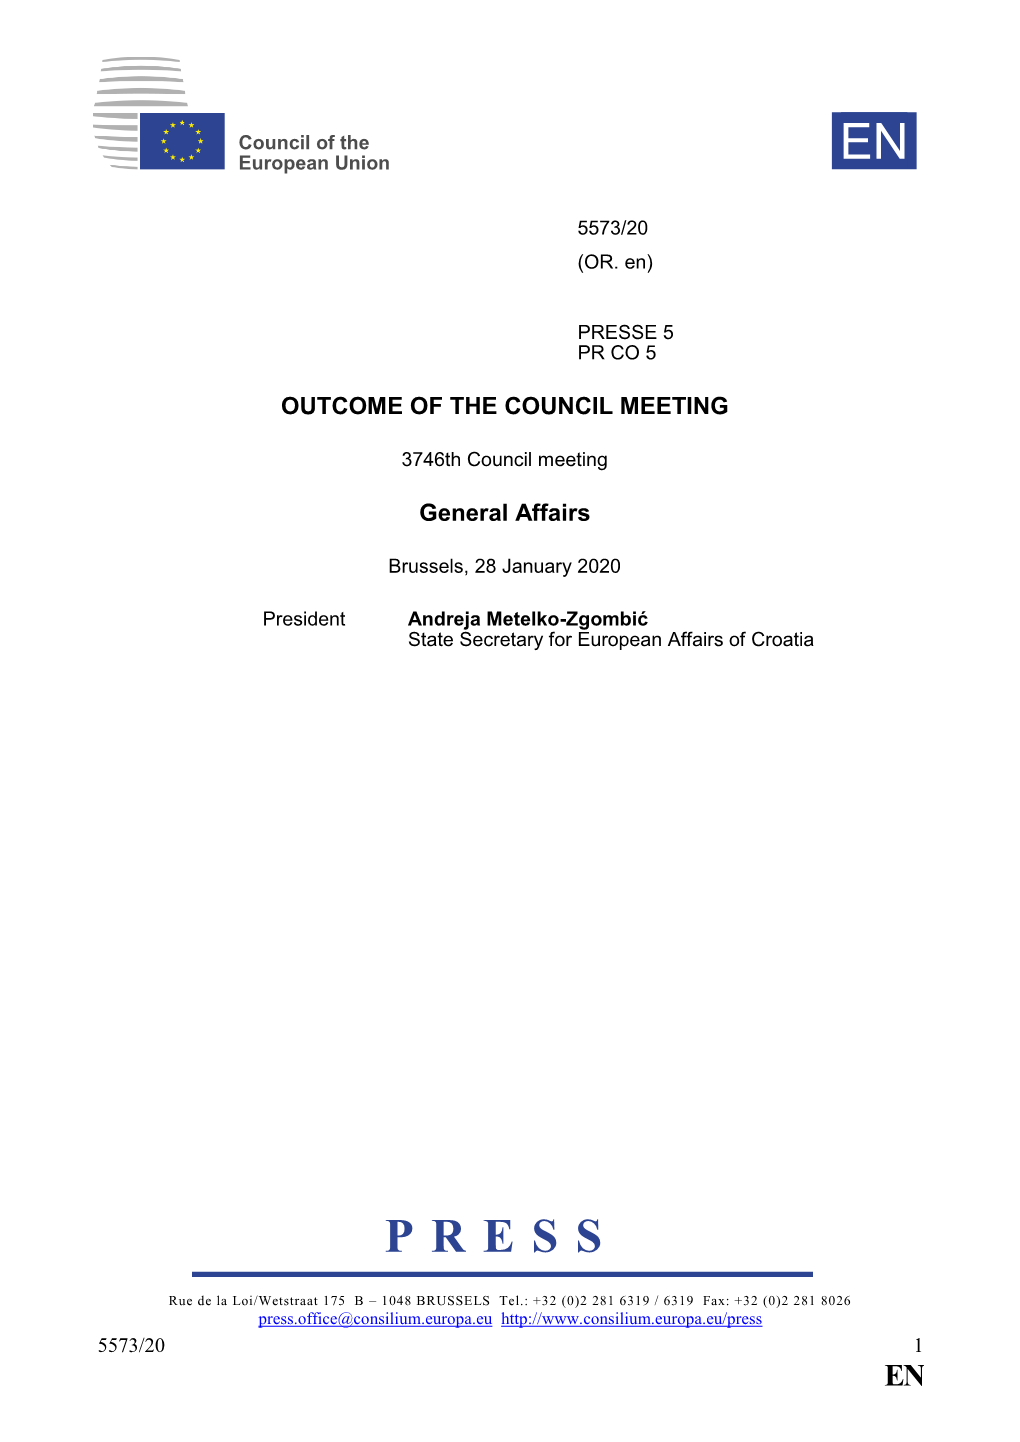 Outcome of the Council Meeting